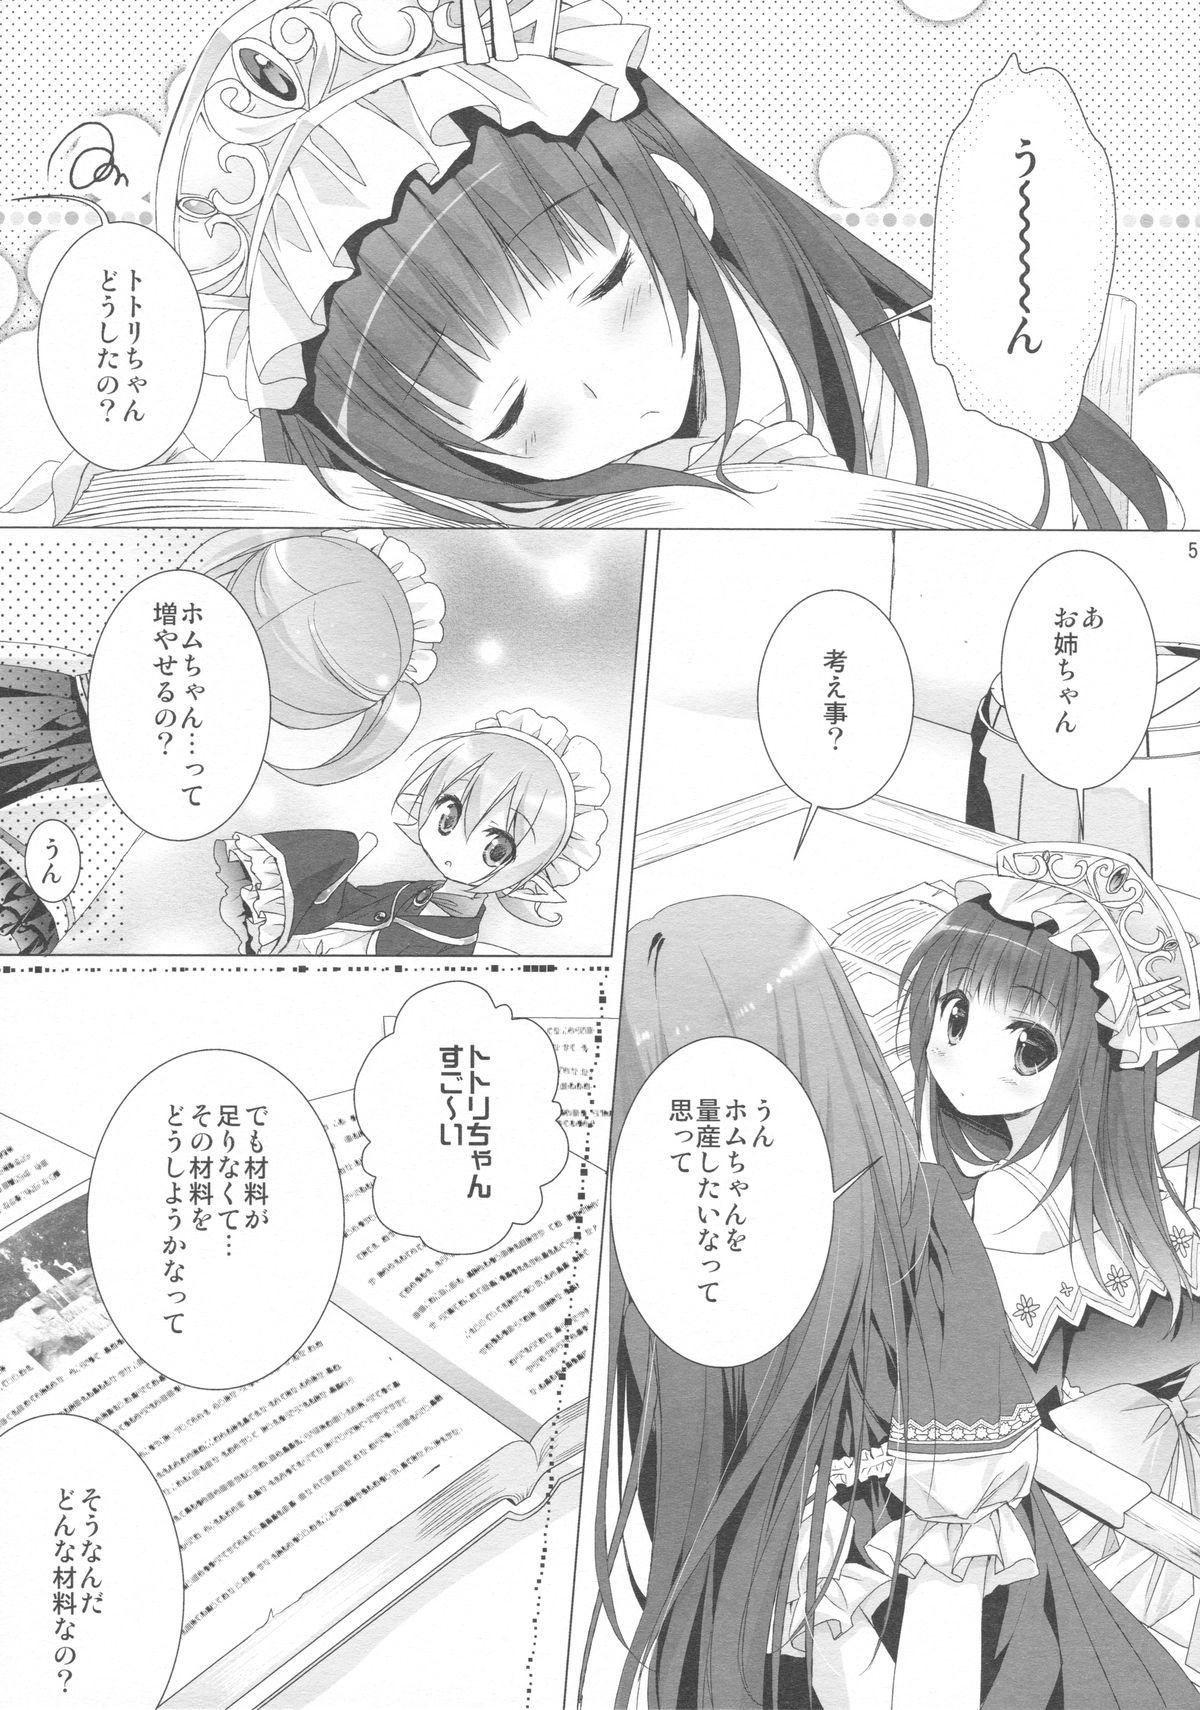 Blows 2-Shuume no True End - Atelier totori Monstercock - Page 3